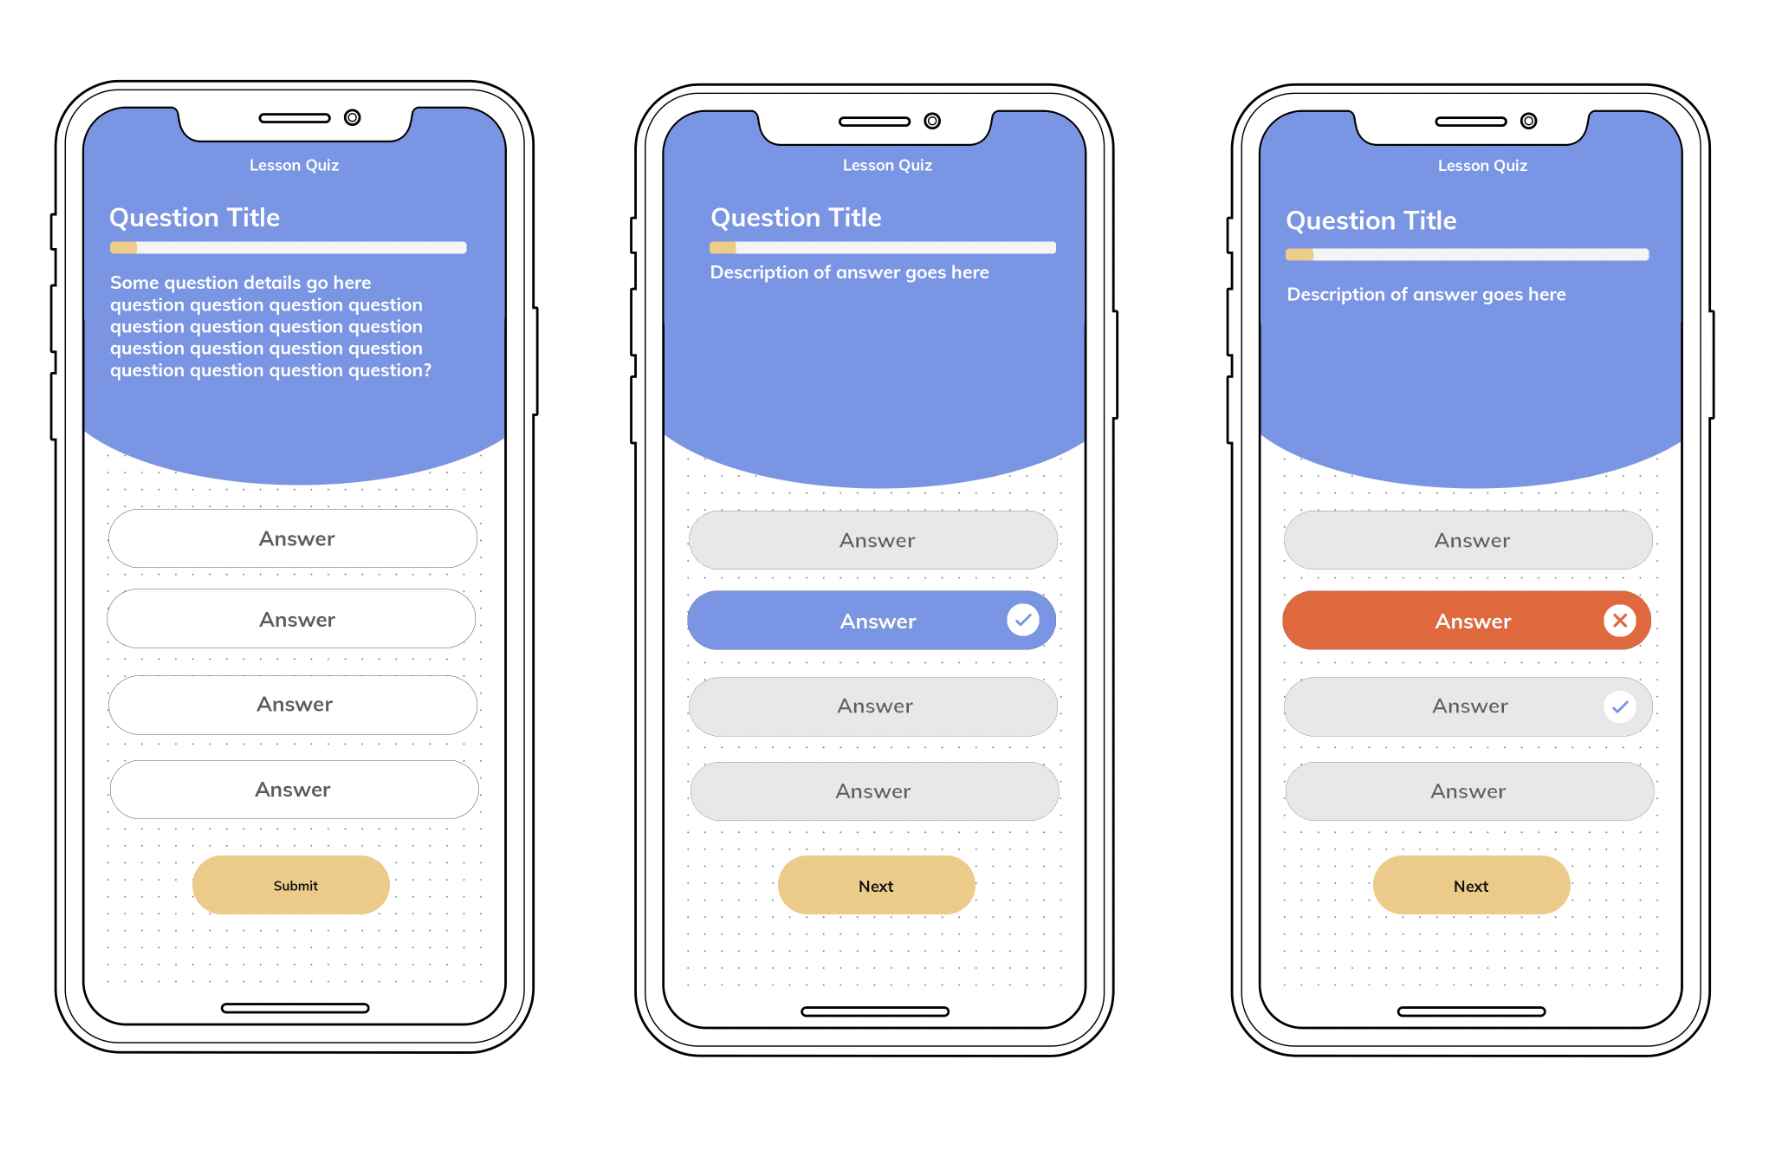 Wireframe images of the Baby Blues app